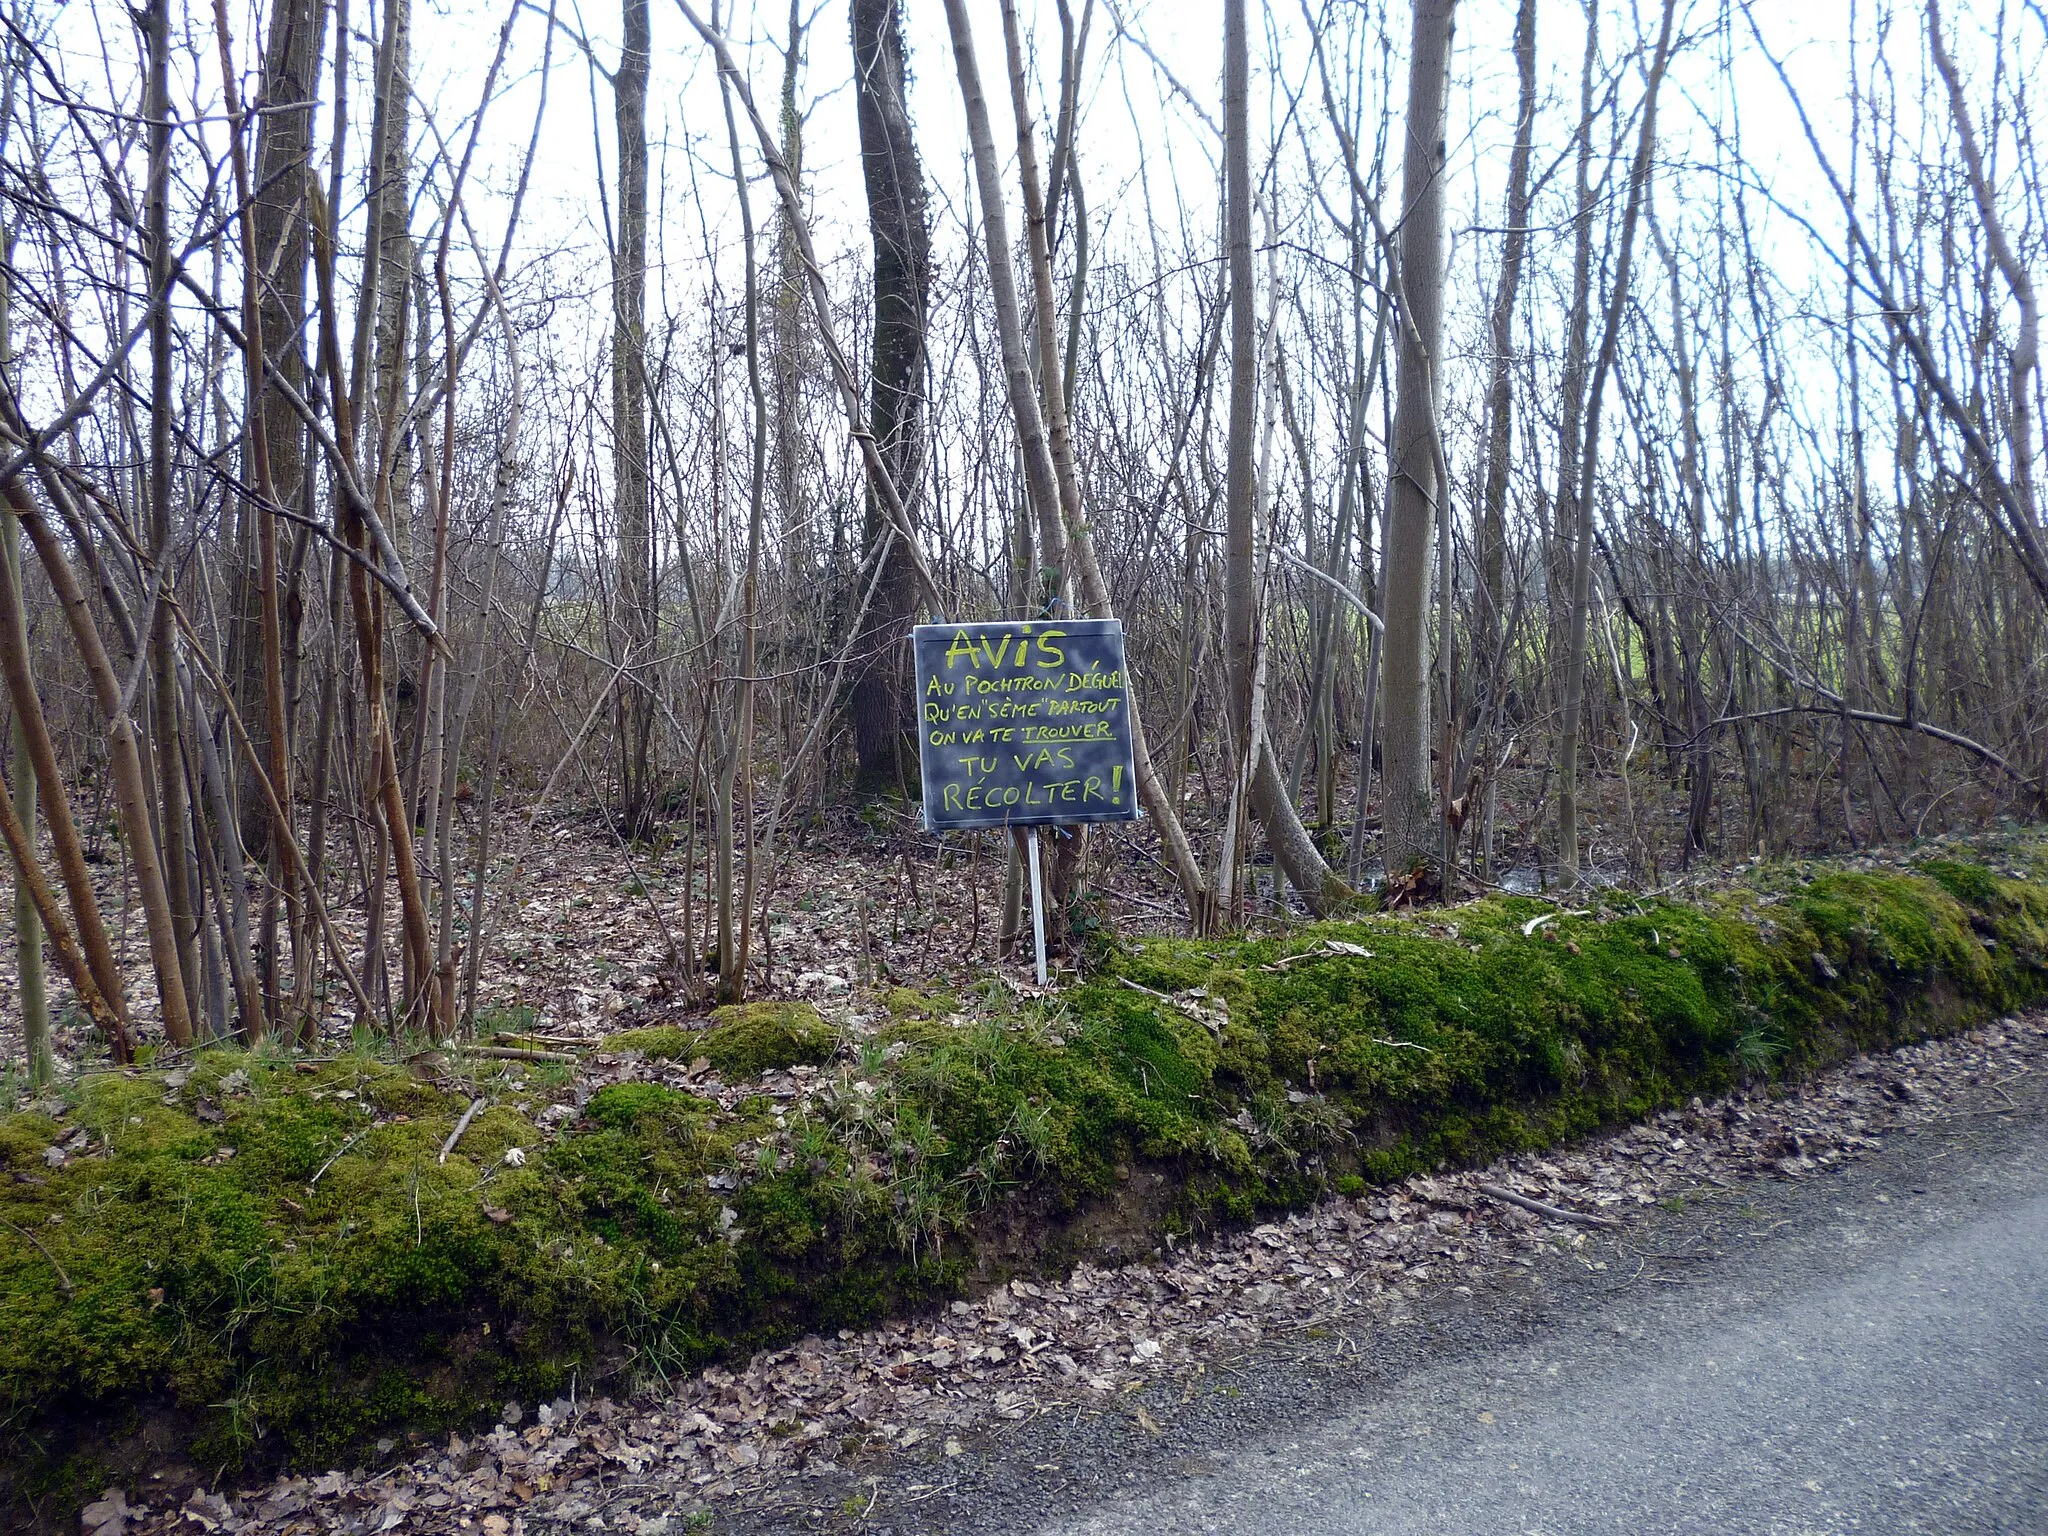 Photo showing: One of several signs around a small forest in Saint-Benoît-des-Ombres (Eure, France). The text means: "Warning to the hideous drunkard who "seeds" everywhere. Someone will find you and then YOU WILL HARVEST!" I've seen some beercans lying around, so I guess this sign tries to prevent pollution.